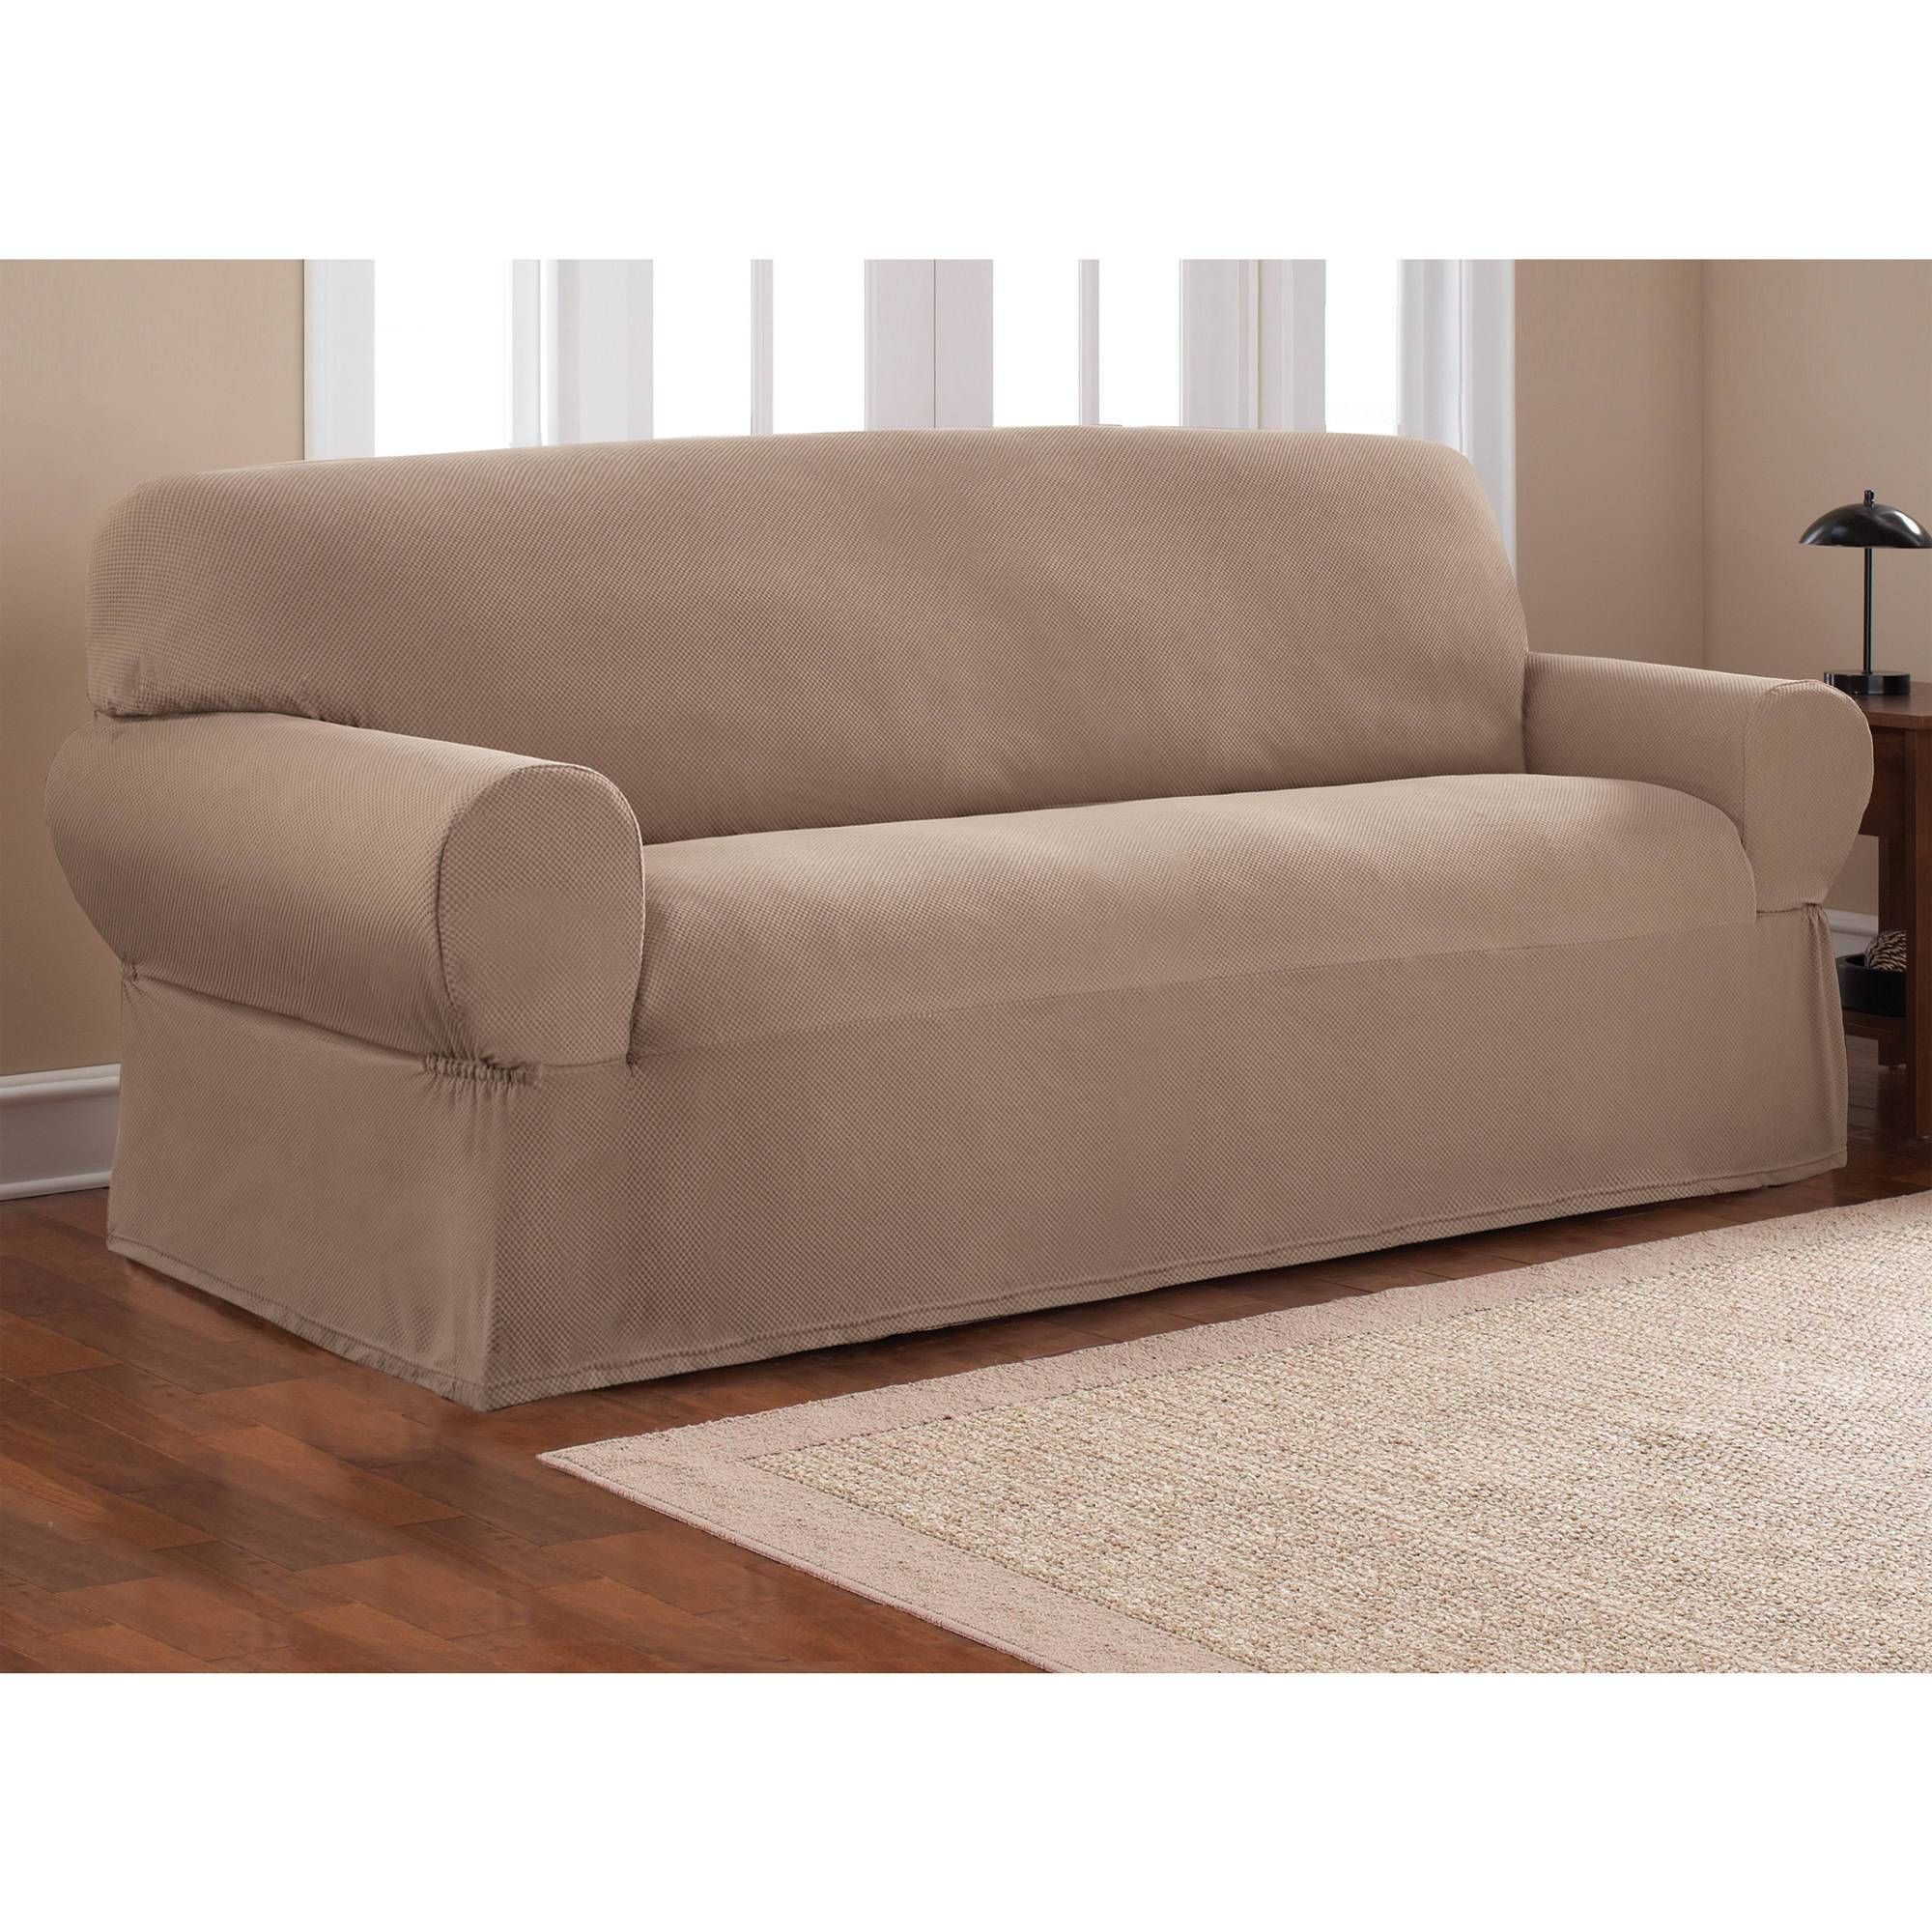 Mainstays 1 Piece Stretch Fabric Sofa Slipcover – Walmart With Patterned Sofa Slipcovers (View 11 of 15)